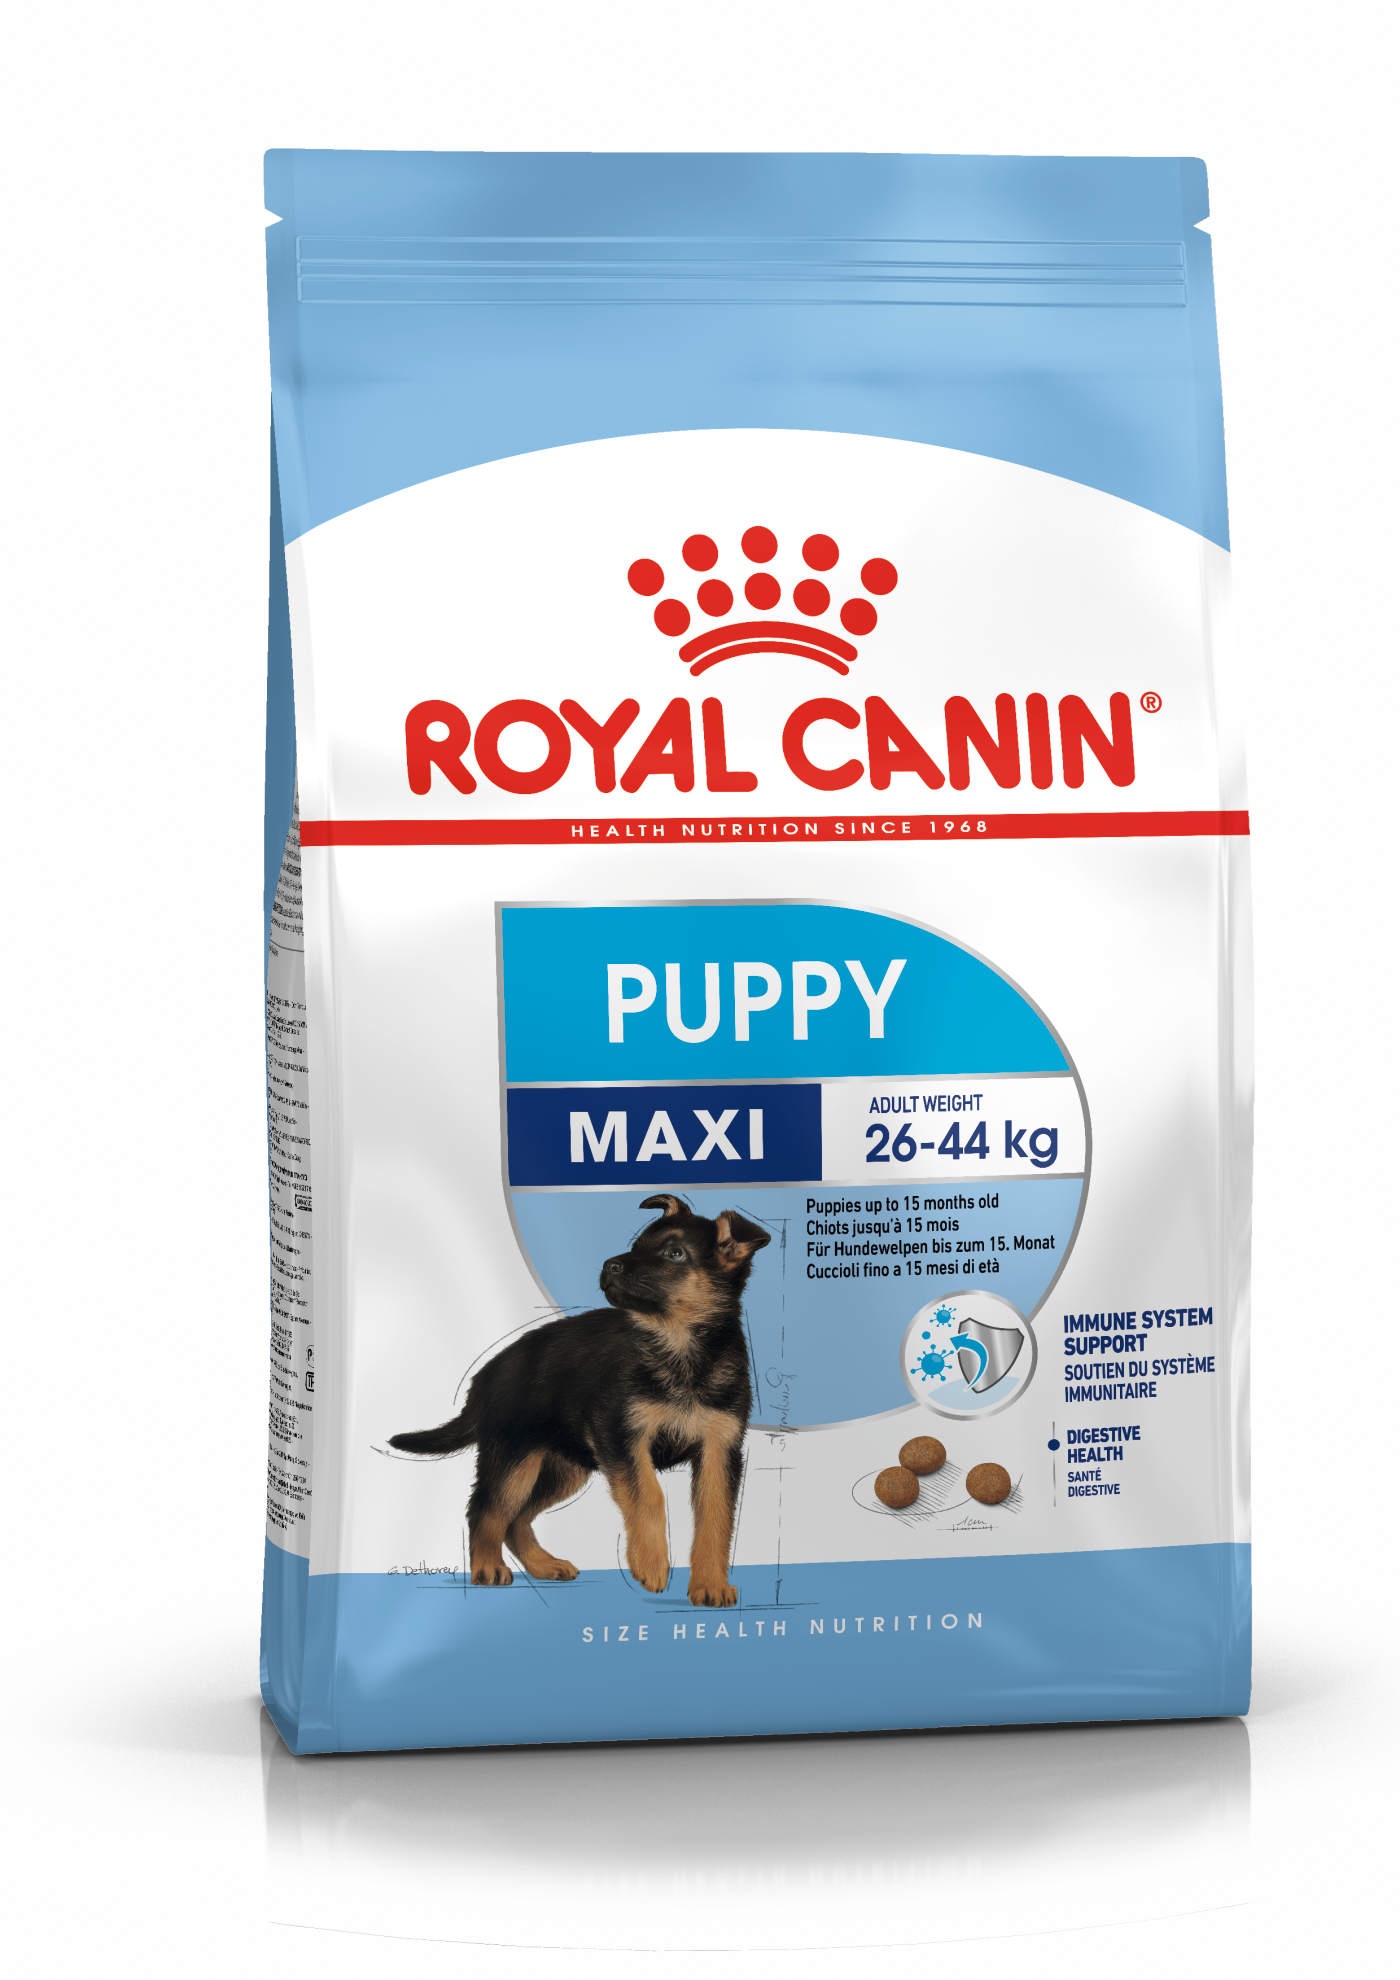 royal canin grams to cups